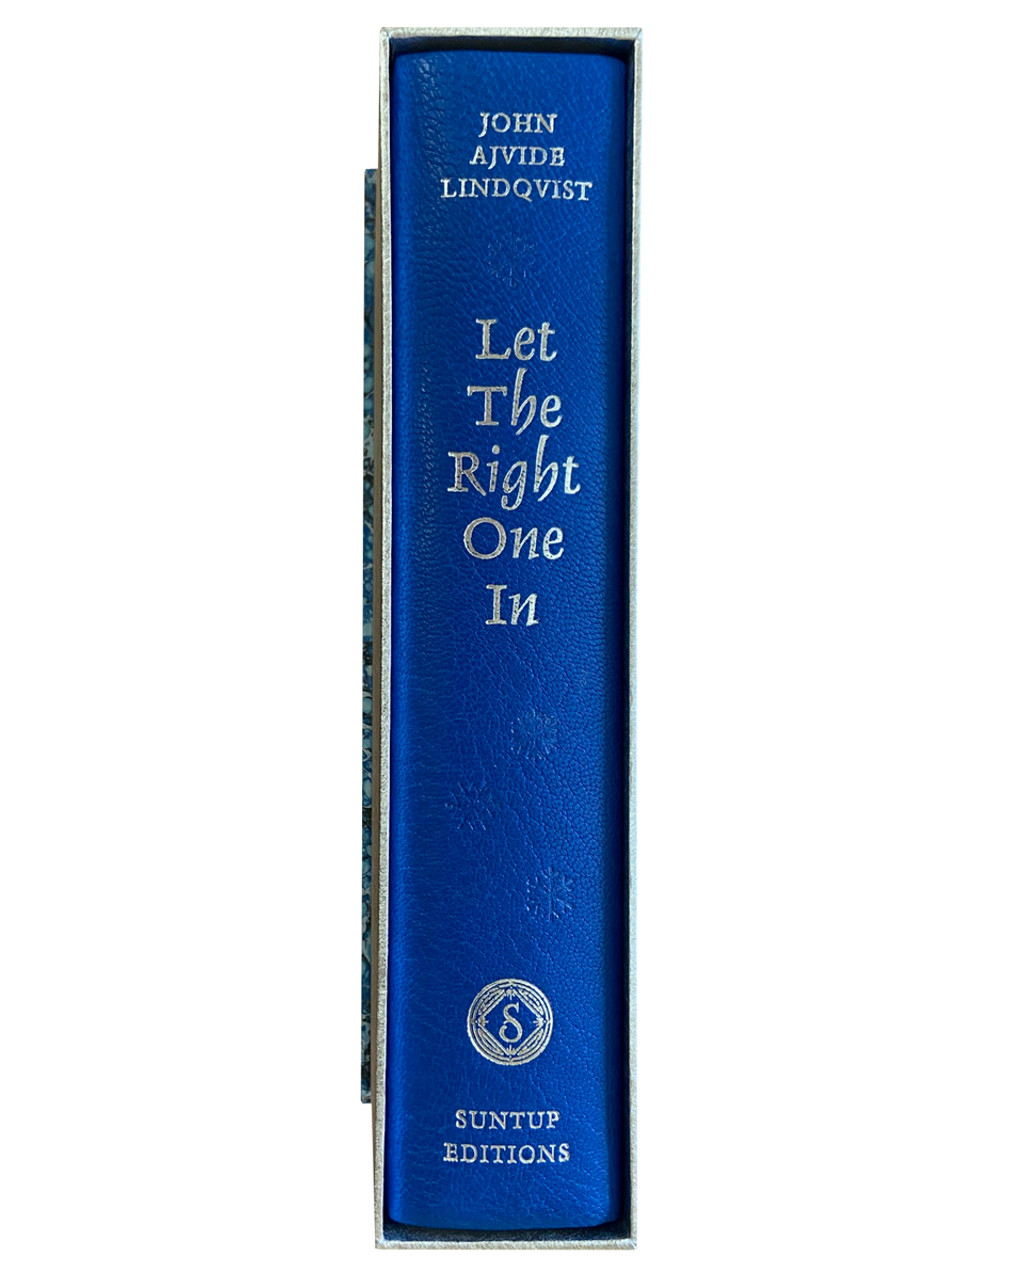 John Ajvide Lindqvist "Let The Right One In" Signed Limited Numbered Edition, No. 81 of 250 Slipcased, Leather Bound Collector's Edition [Very Fine]